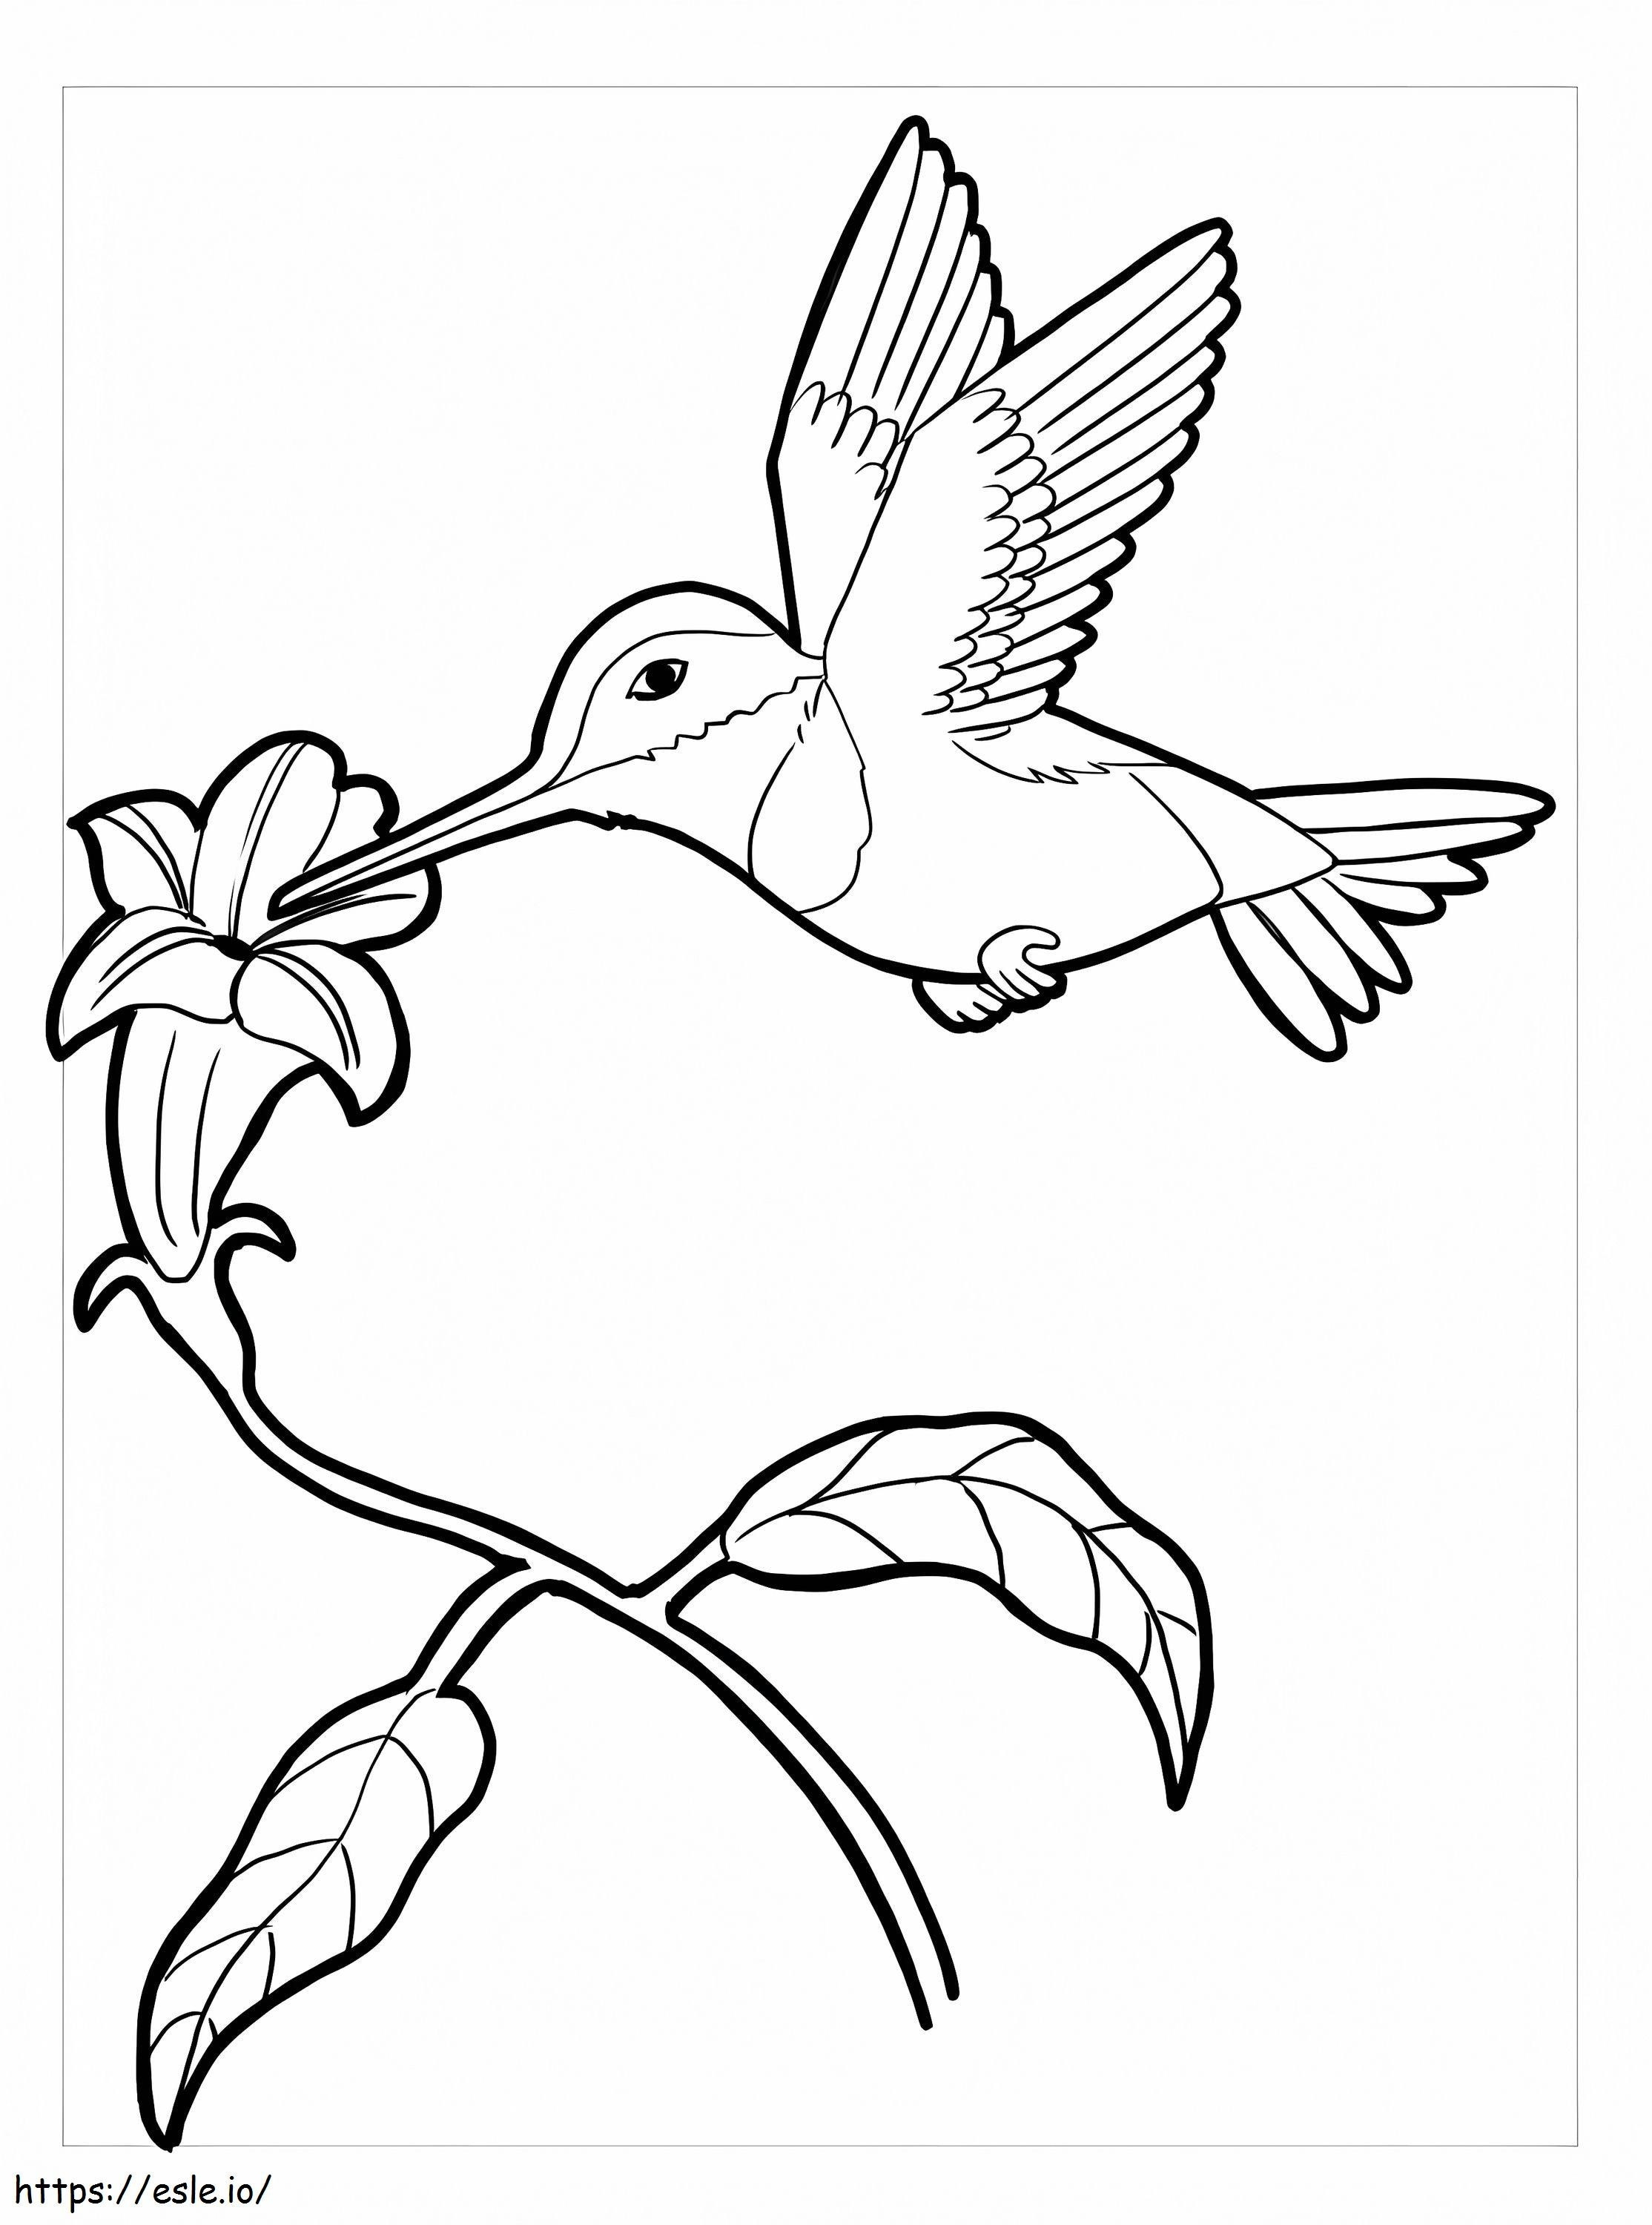 Basic Hummingbird With Flower coloring page